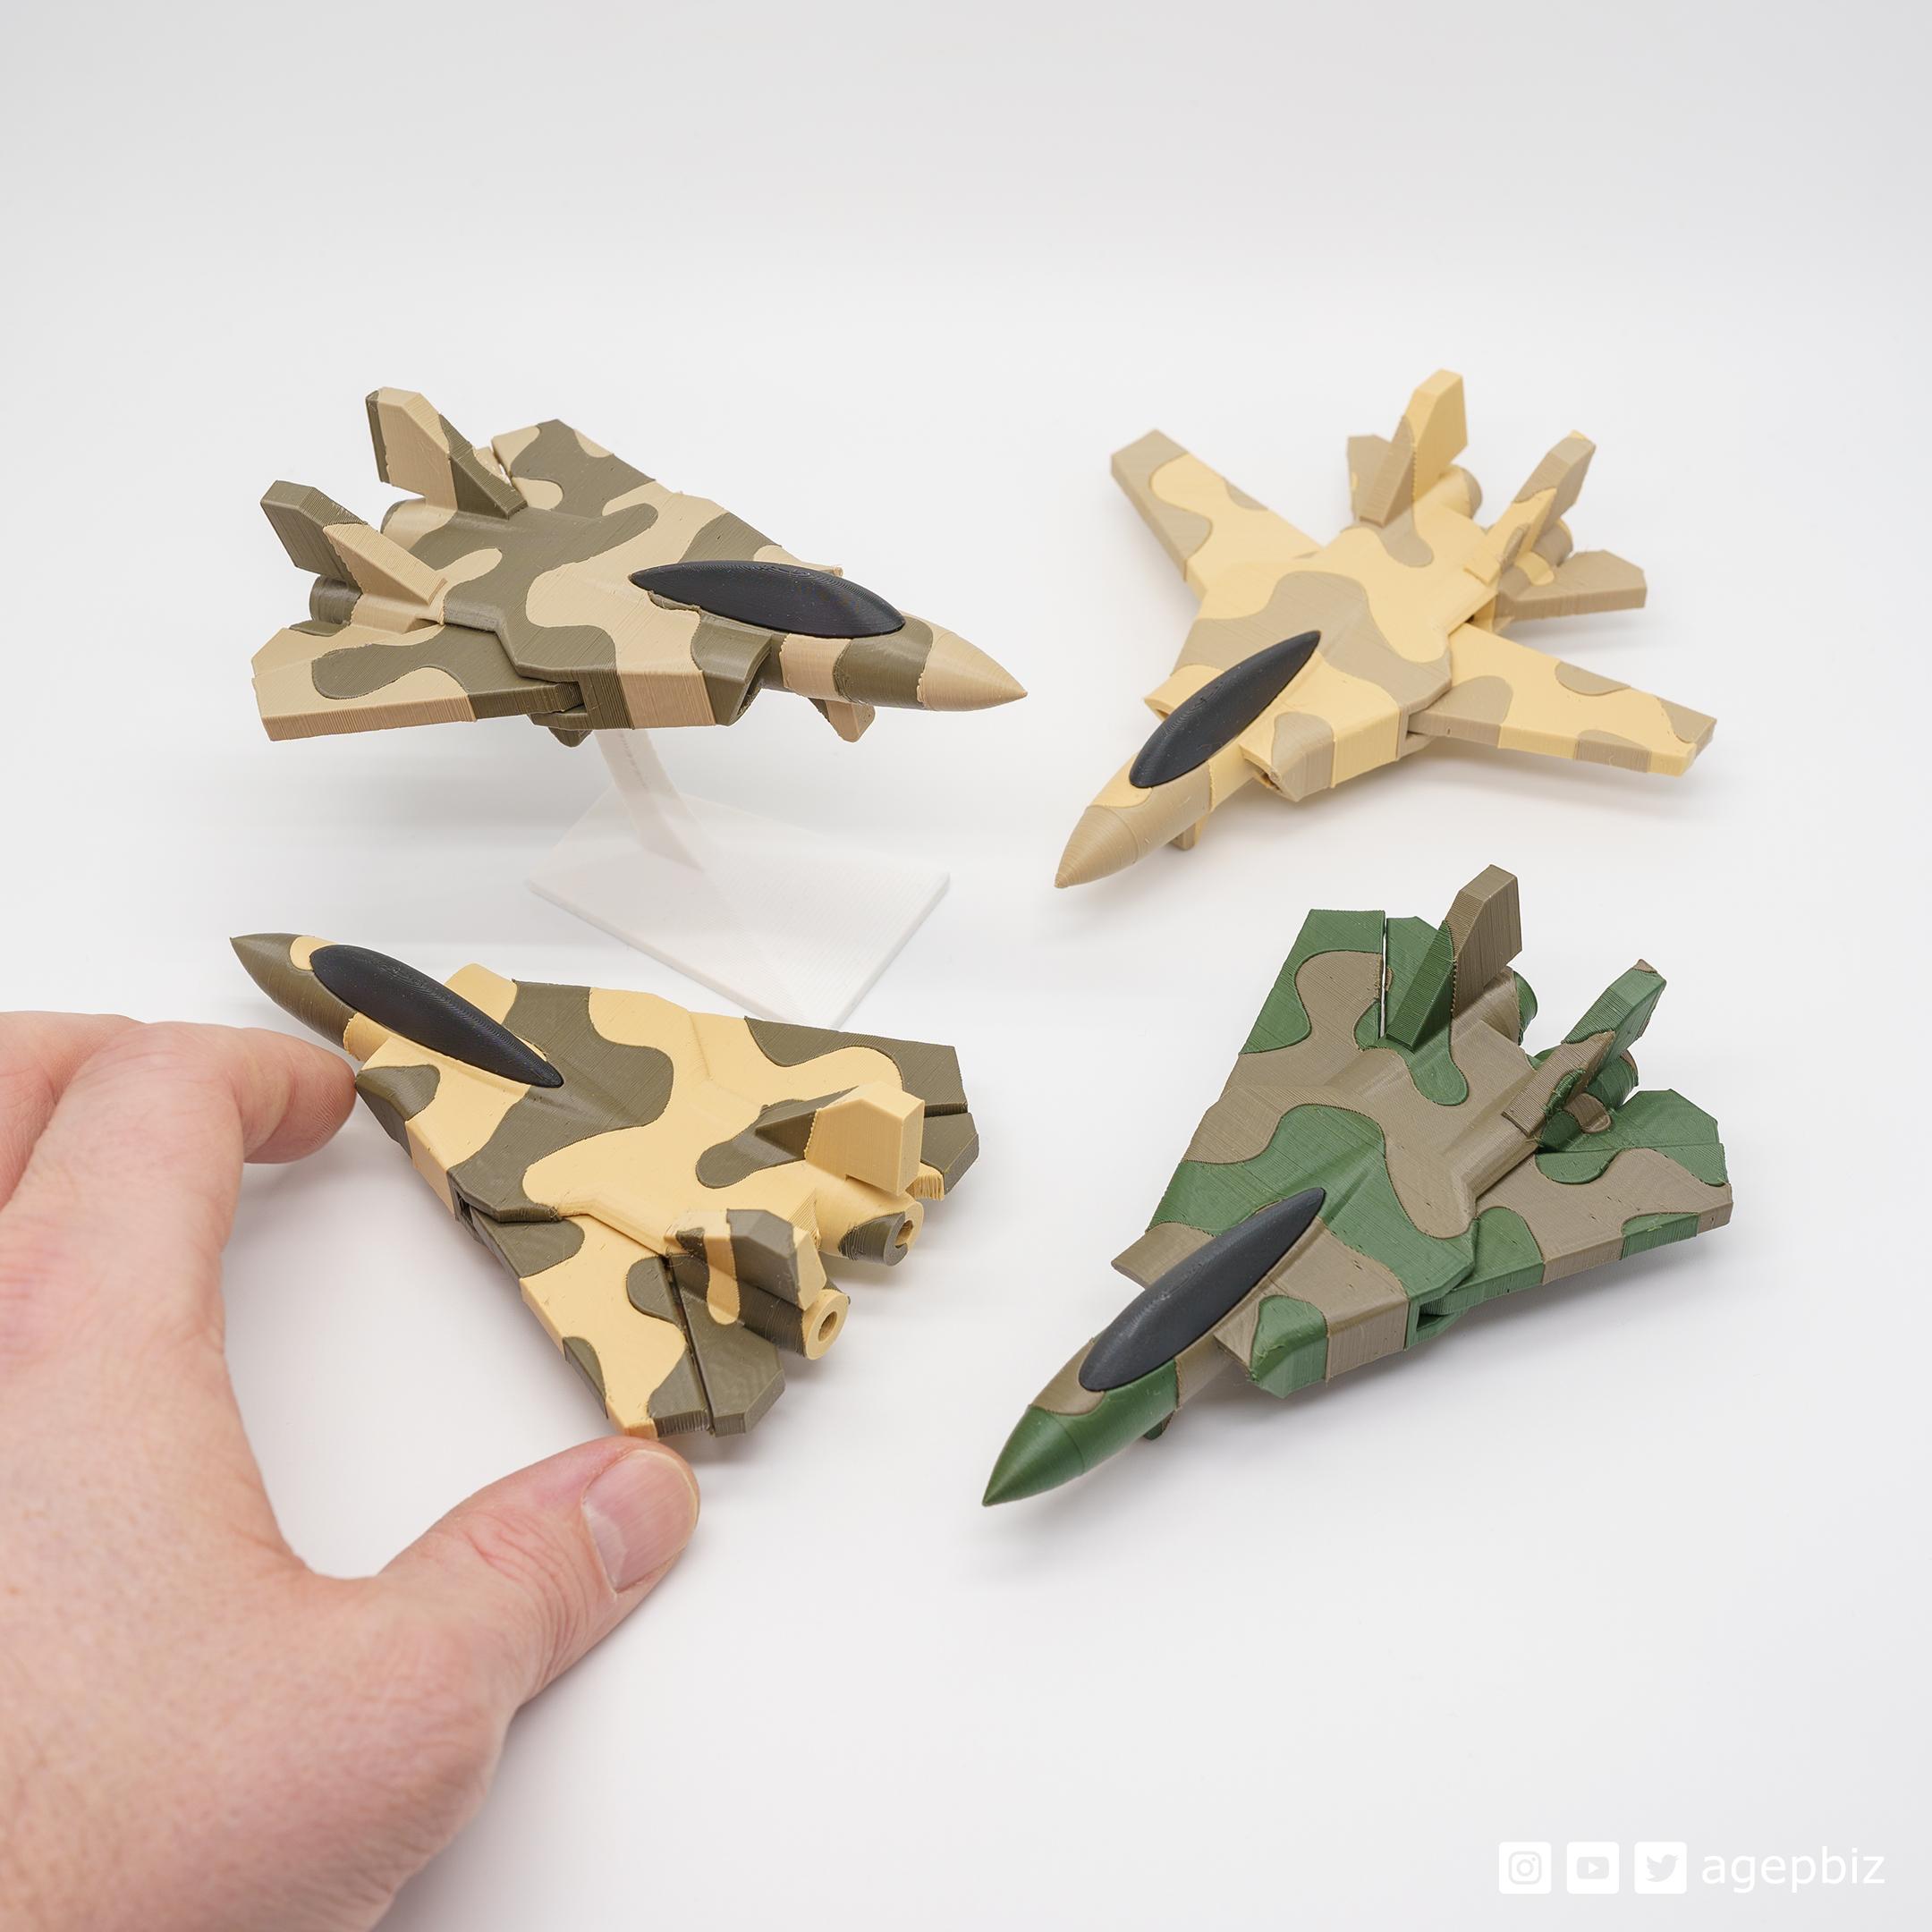 Print-in-place and articulated F14 with Camo - IDEX 3d model